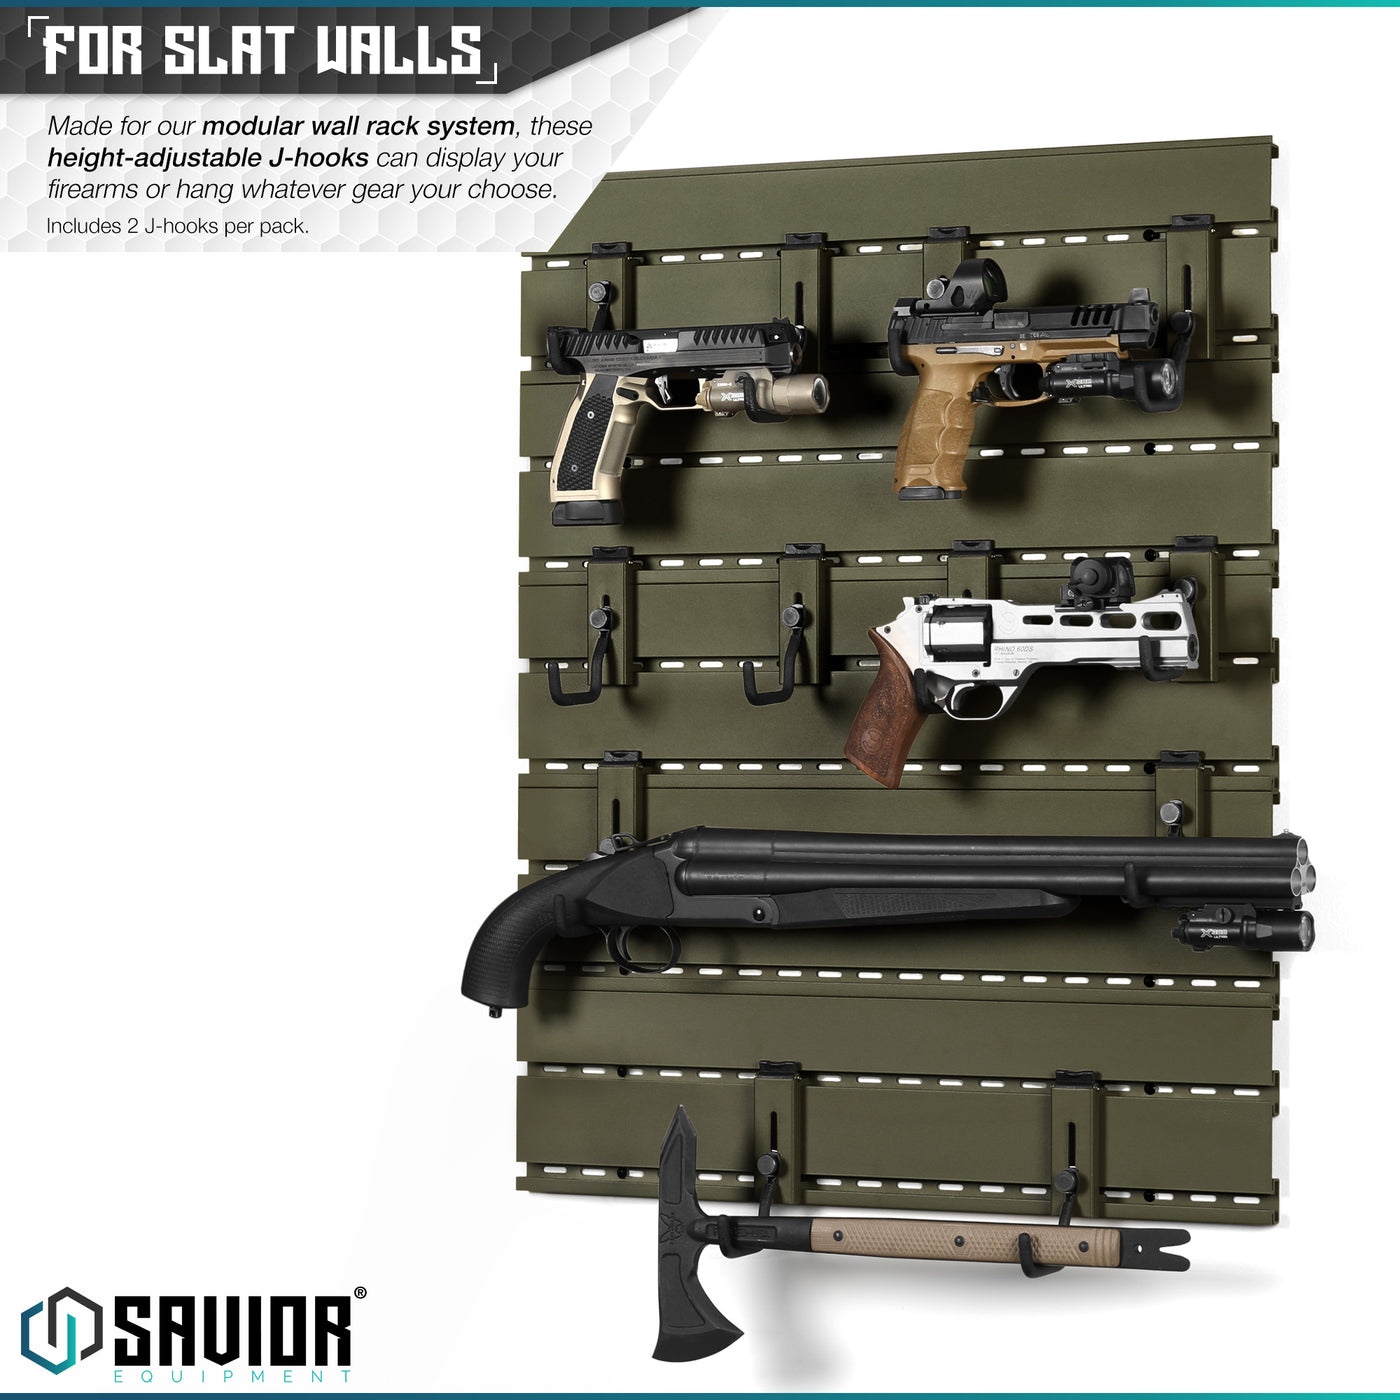 For Slat Walls - Made for our modular wall rack system, these height-adjustable J-hooks can display your firearms horizontally or hang whatever gear your choose. Includes 2 J-hooks per pack.